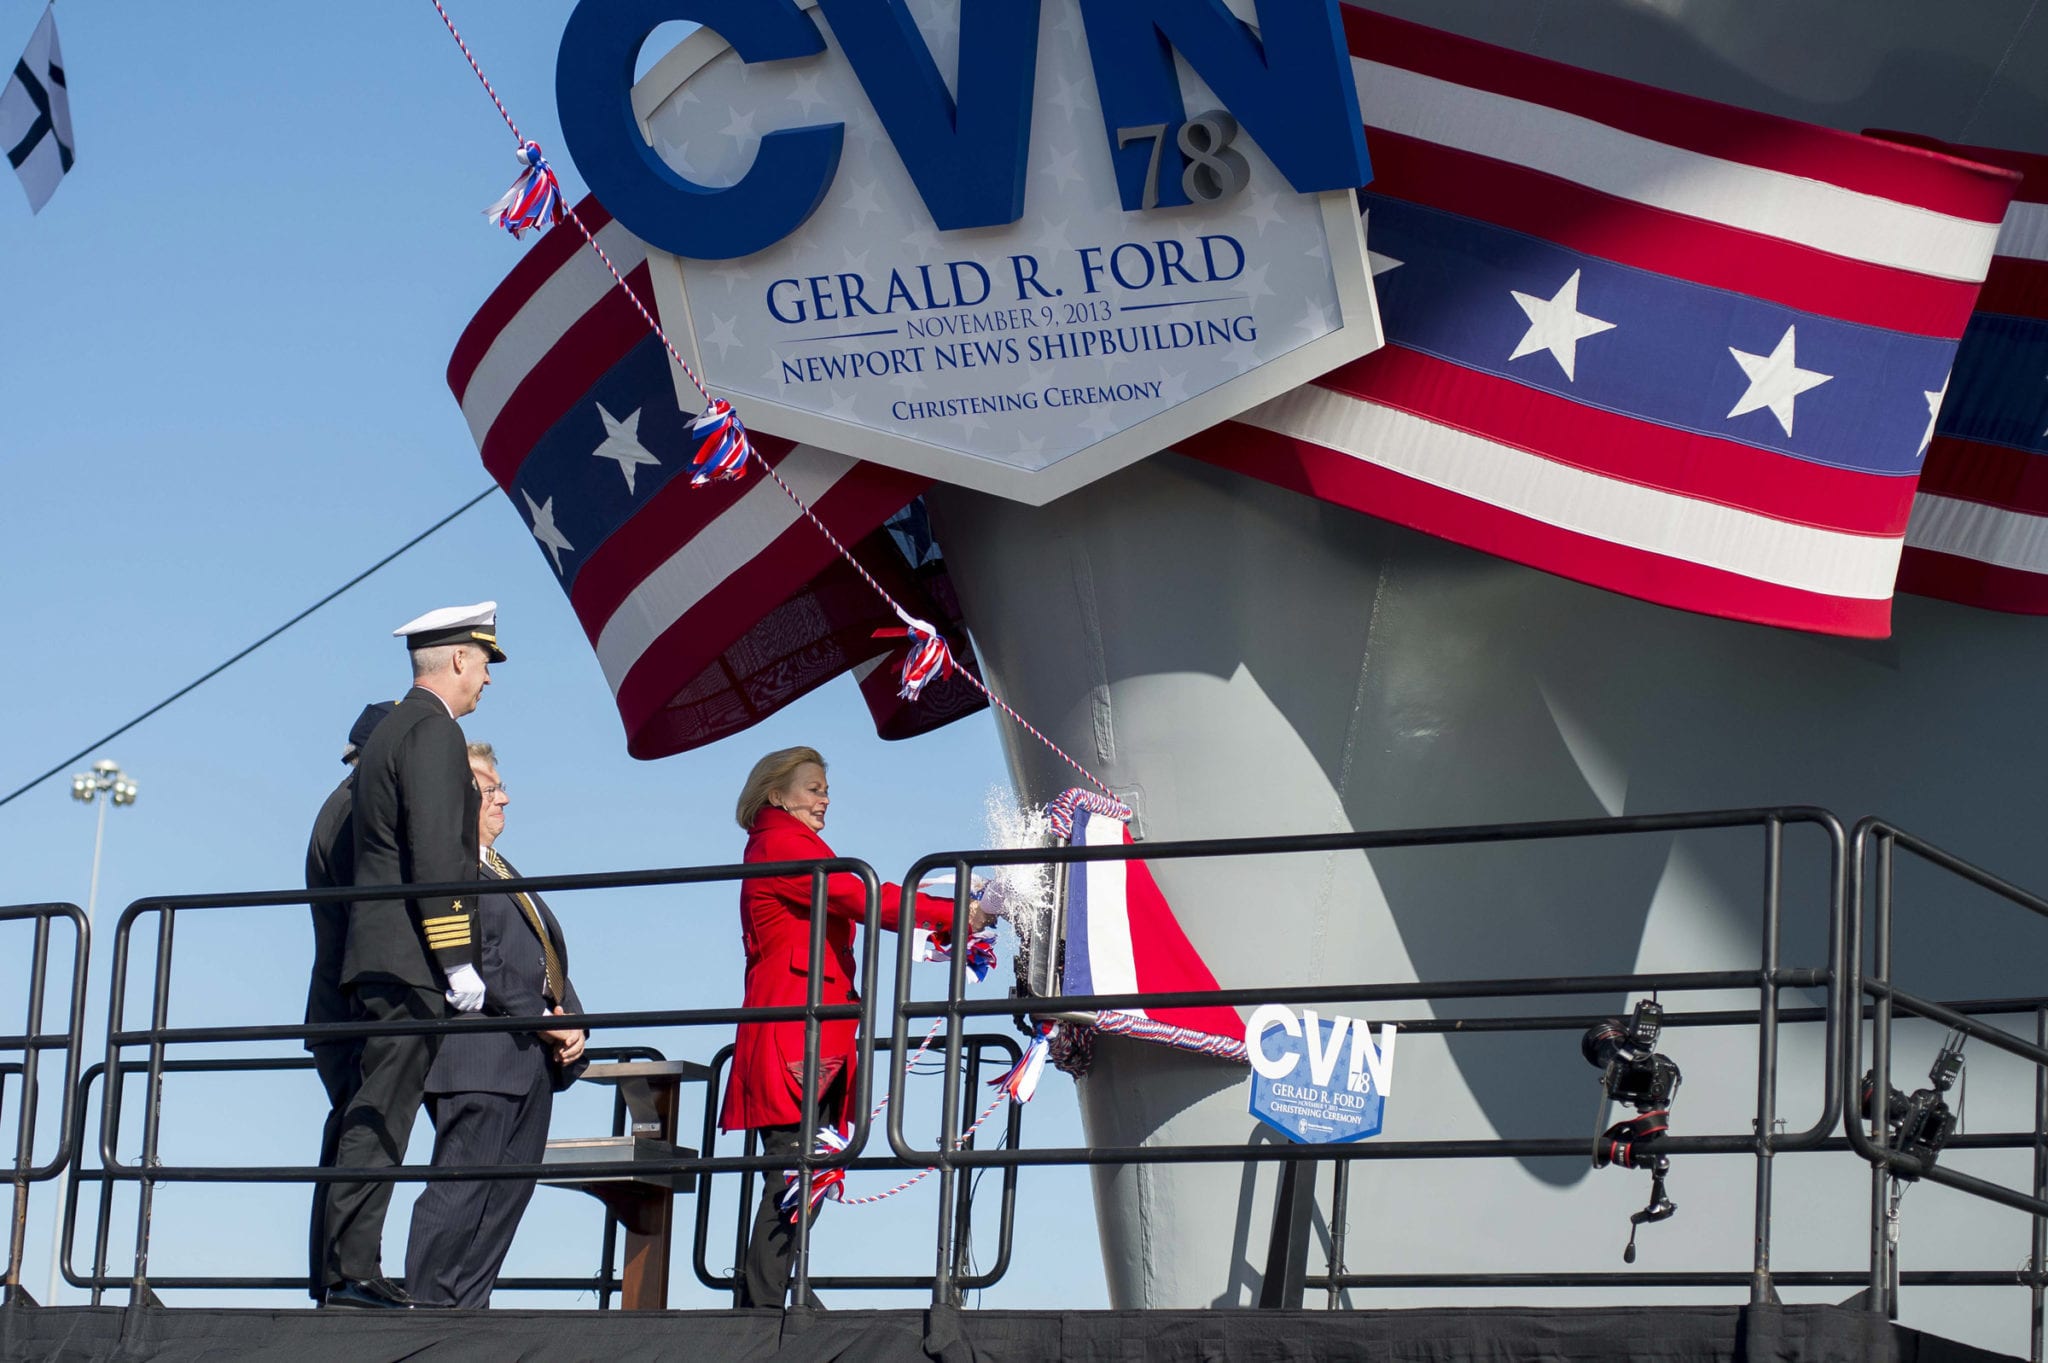 131109-N-WL435-911 NEWPORT NEWS, Va. (Nov. 9, 2013) Susan Ford Bales, daughter of former President Gerald R. Ford and sponsor of the aircraft carrier that bears his name, breaks a bottle of champagne on the bow of the aircraft carrier Gerald R. Ford (CVN 78) at Newport News Shipbuilding during the christening ceremony for the Ford. The first in class, Ford-class aircraft carrier, is scheduled to join the fleet in 2016. (U.S. Navy photo by Chief Mass Communication Specialist Peter D. Lawlor/Released)